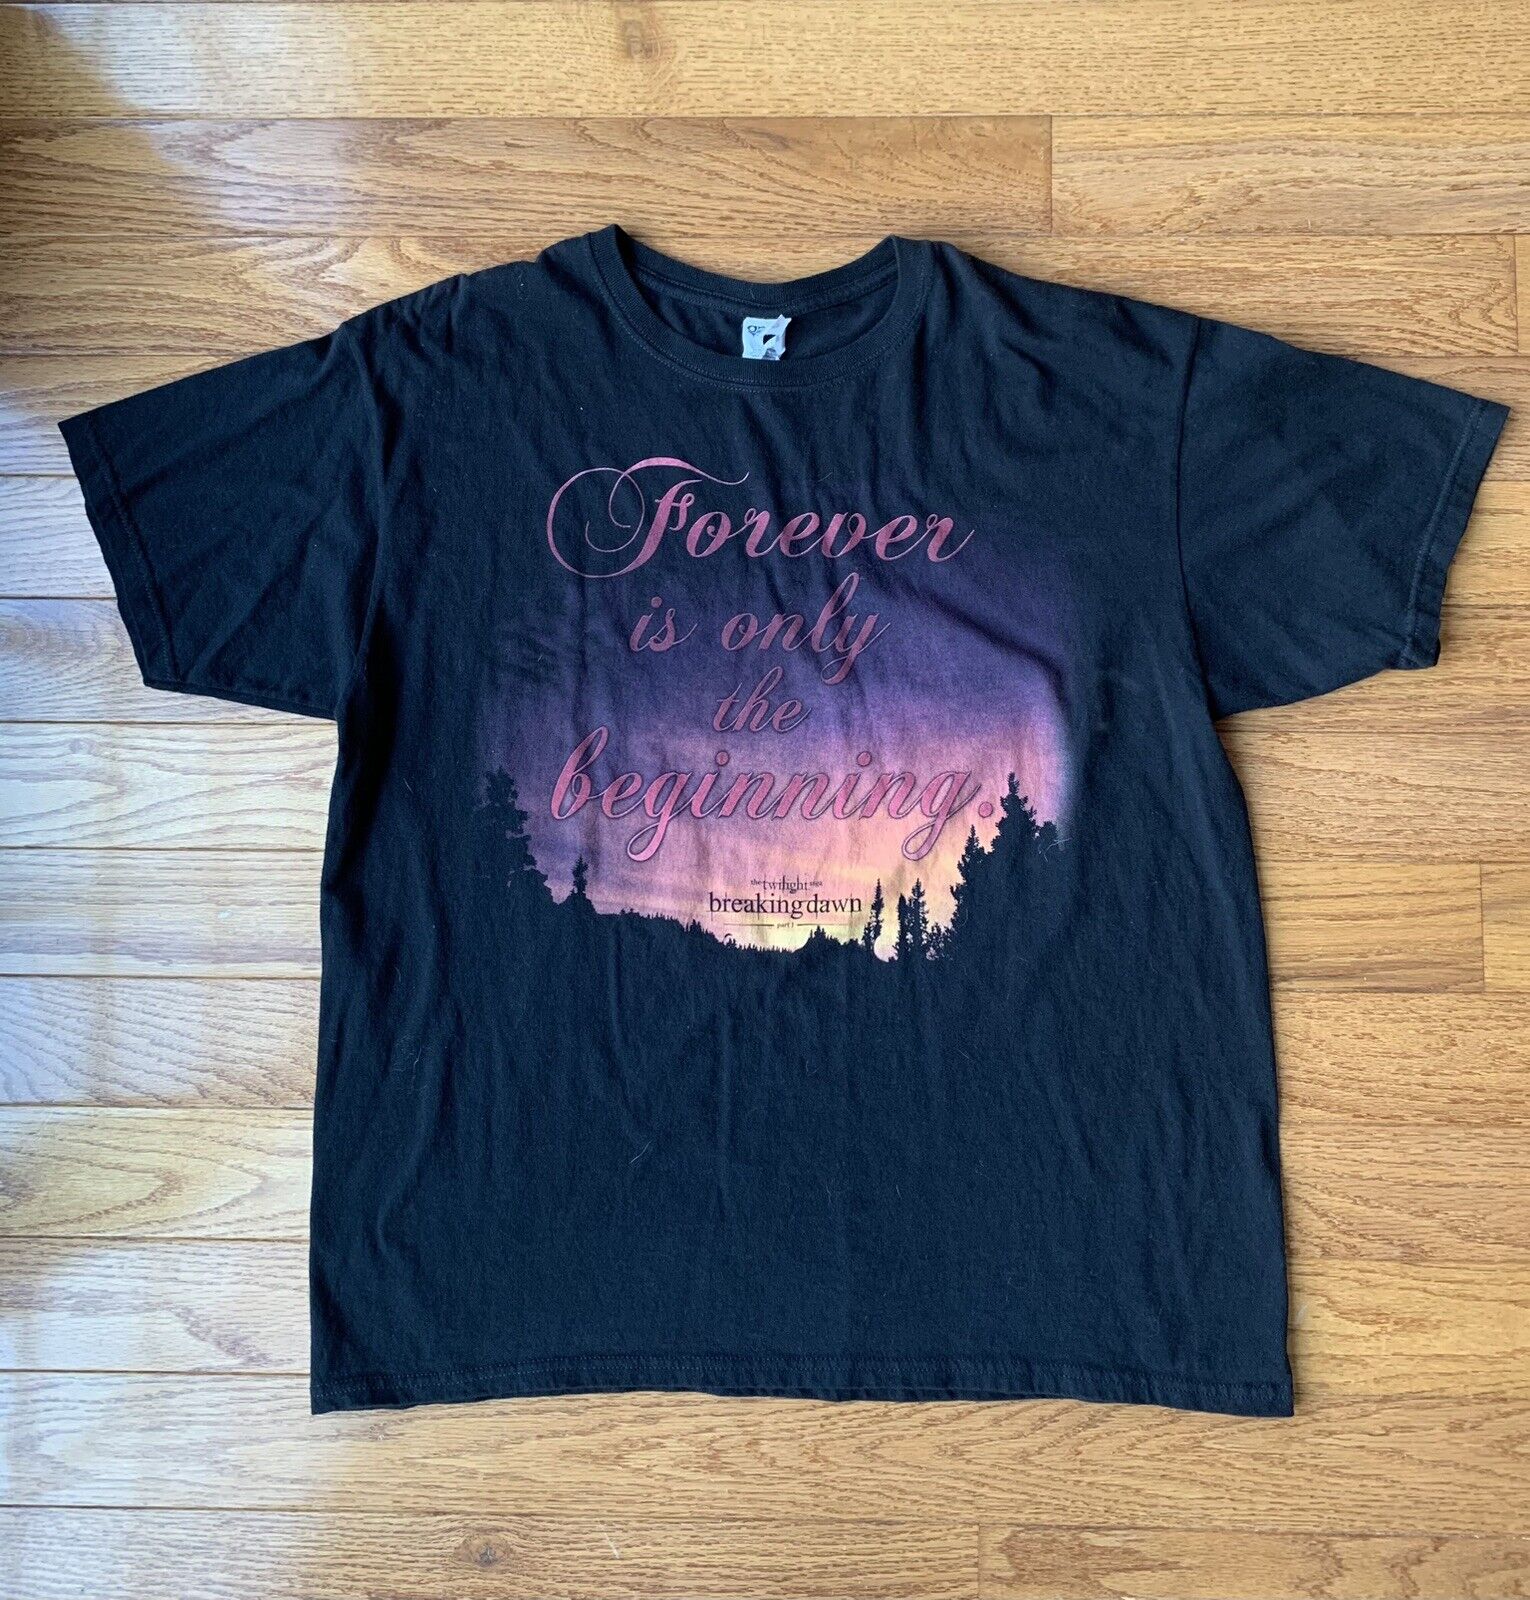 Vintage Twilight Saga Breaking Dawn Forever Is The Only Beginning Blk Shirt XL